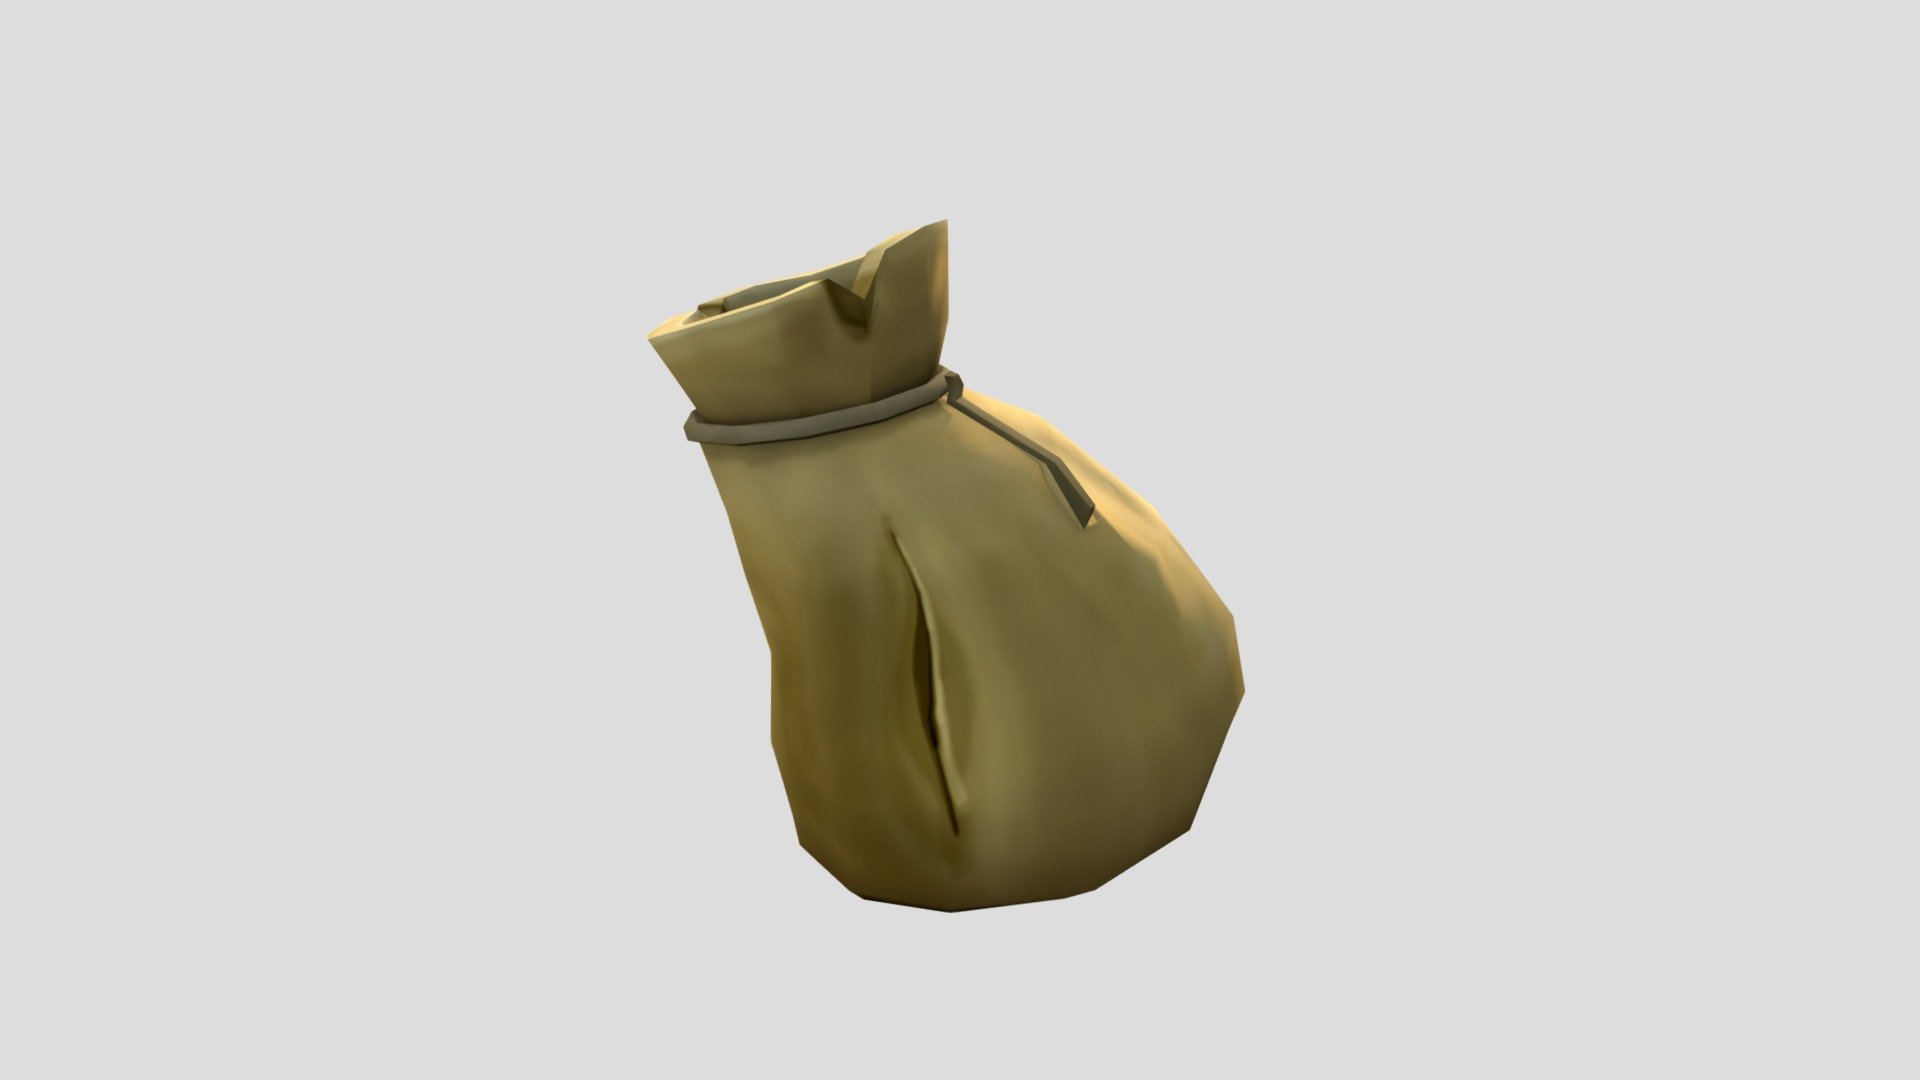 This Bag O' Loot is full of goodies that no man can truly imagine&hellip;



10/10 Would Loot Again - Captain Jack Sparrow (Probably)
 - (XB1101 - 09) Bag O' Loot (Normal Test) - Download Free 3D model by Jotham Bate (@Jovakiin) 3d model